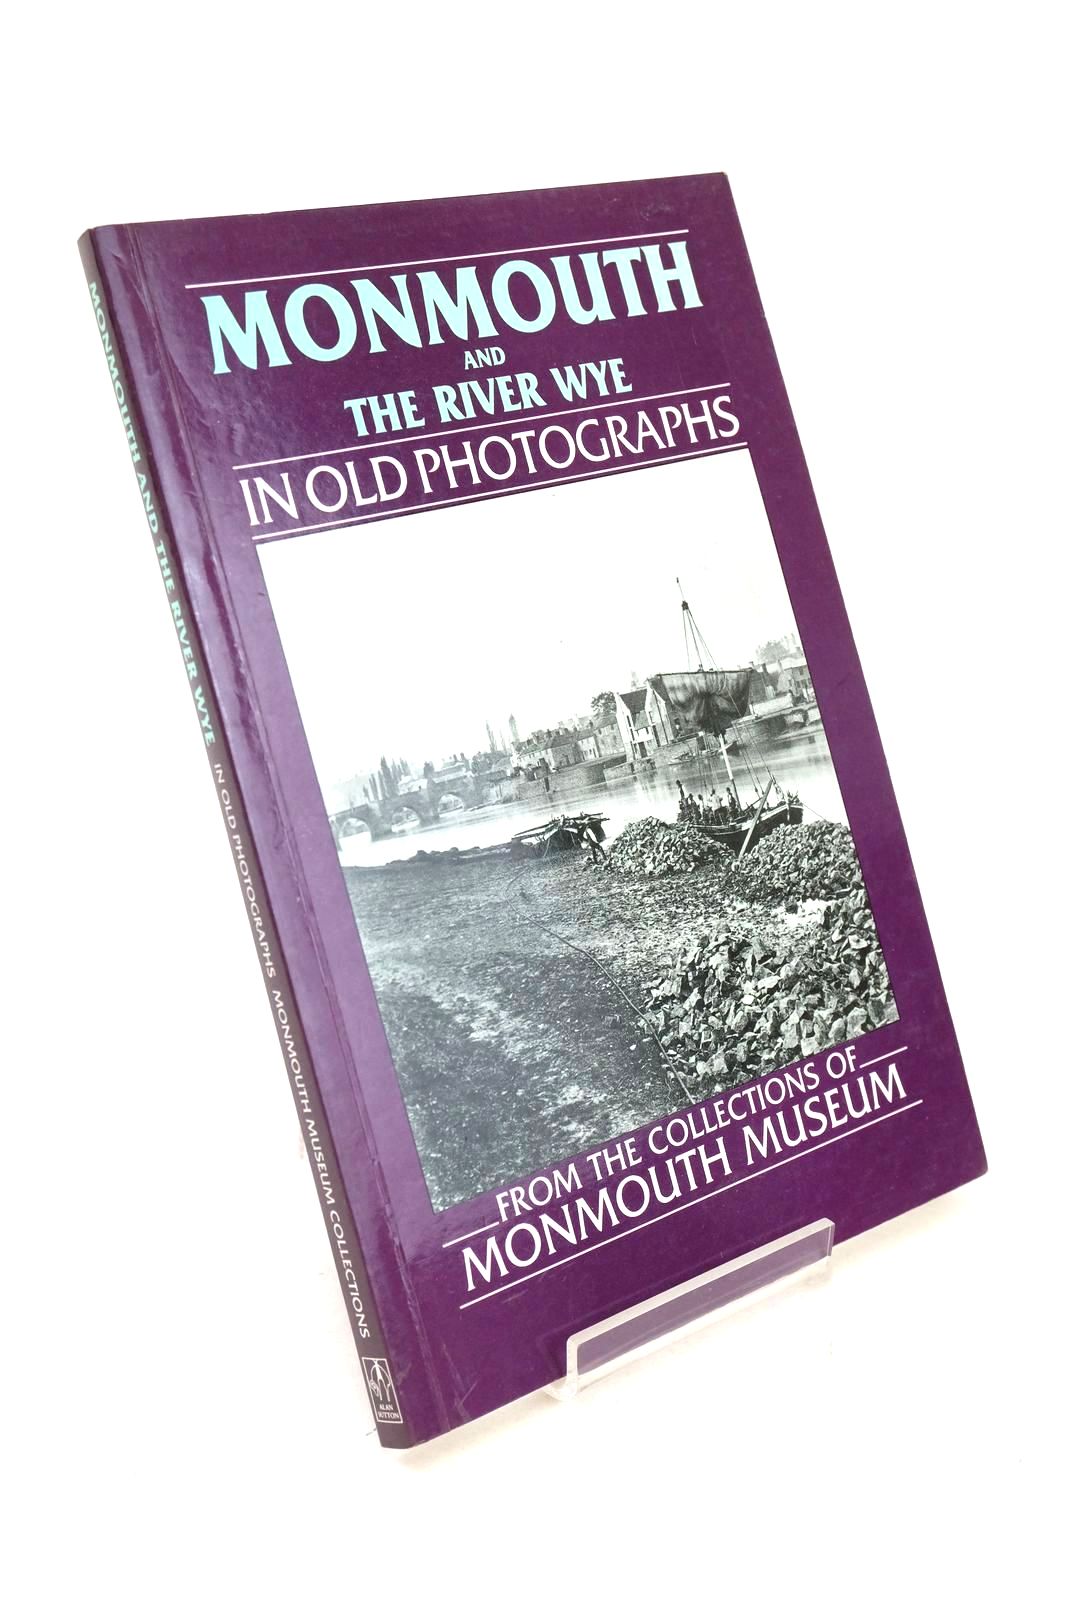 Photo of MONMOUTH AND THE RIVER WYE IN OLD PHOTOGRAPHS- Stock Number: 1327154